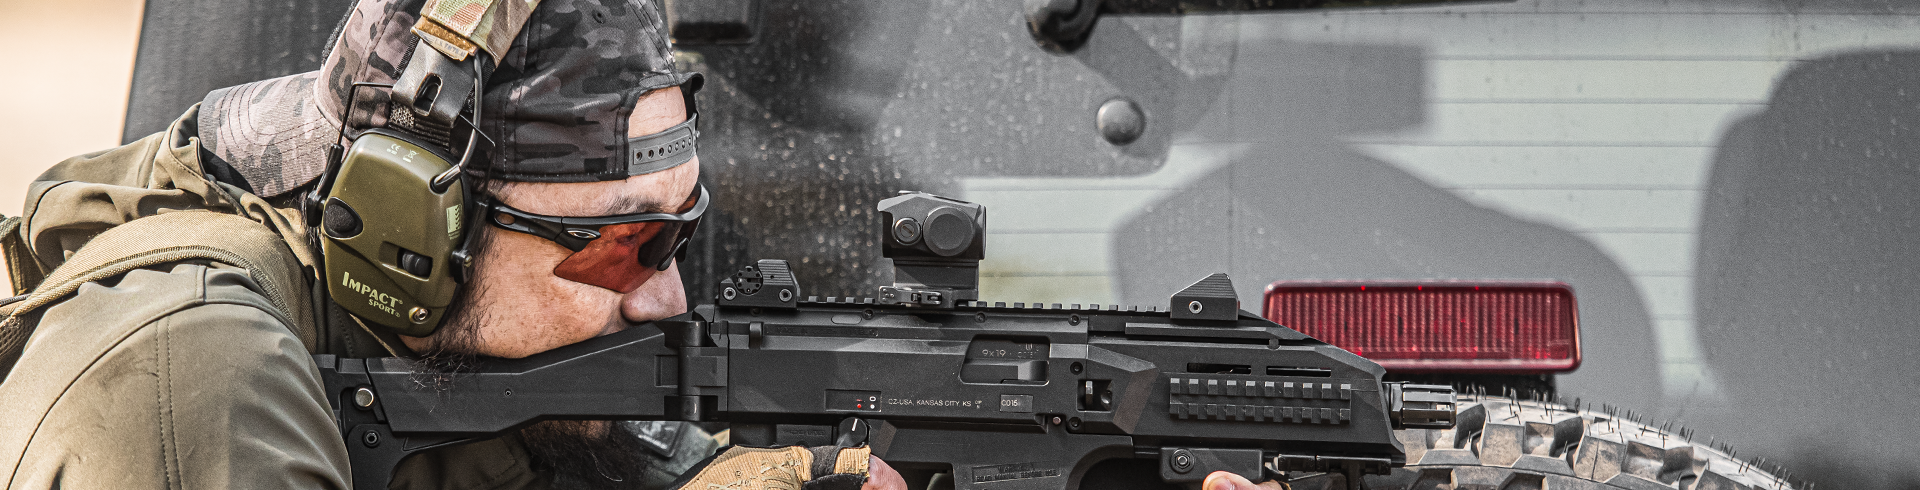 DOT SIGHTS & MAGNIFIERS